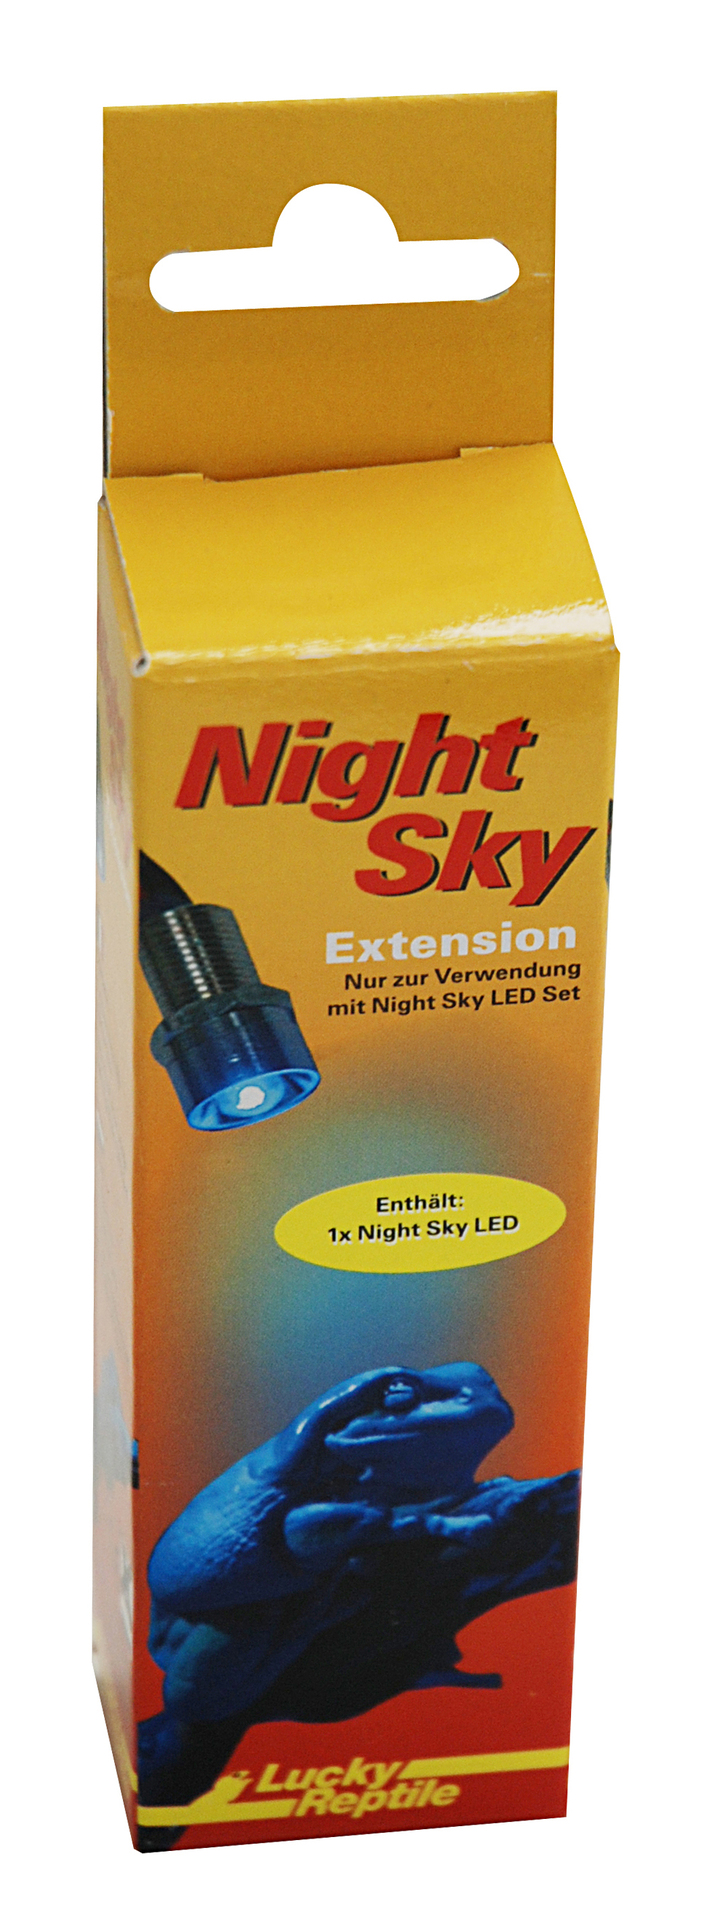 Import-Export Peter Hoch GmbH Night Sky Extension LED